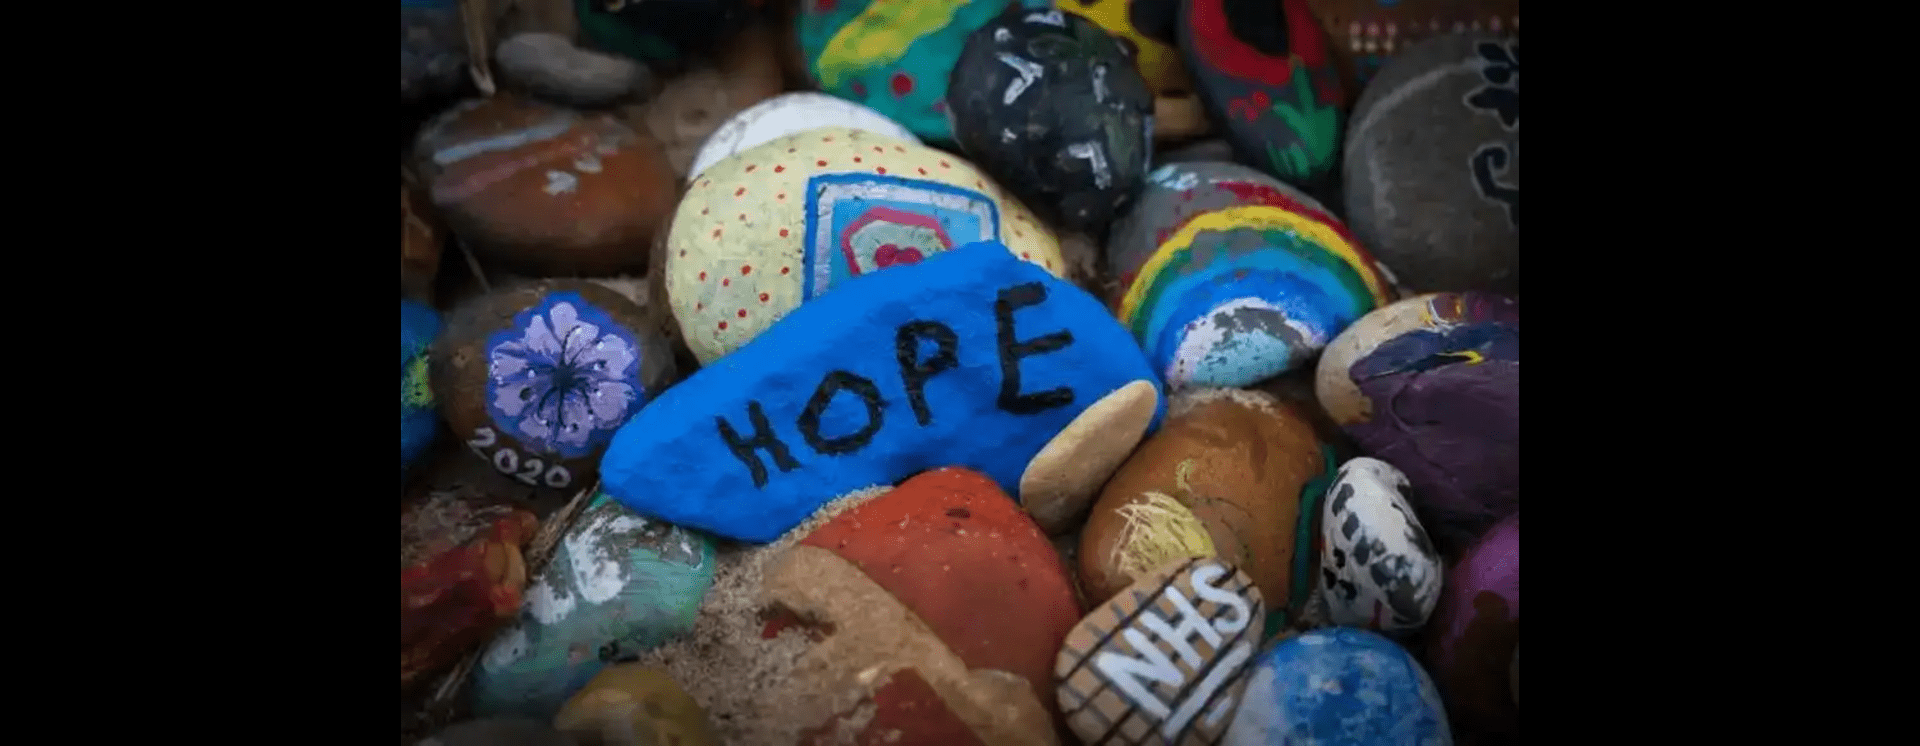 A pile of stone with the word 'hope' written on one of them